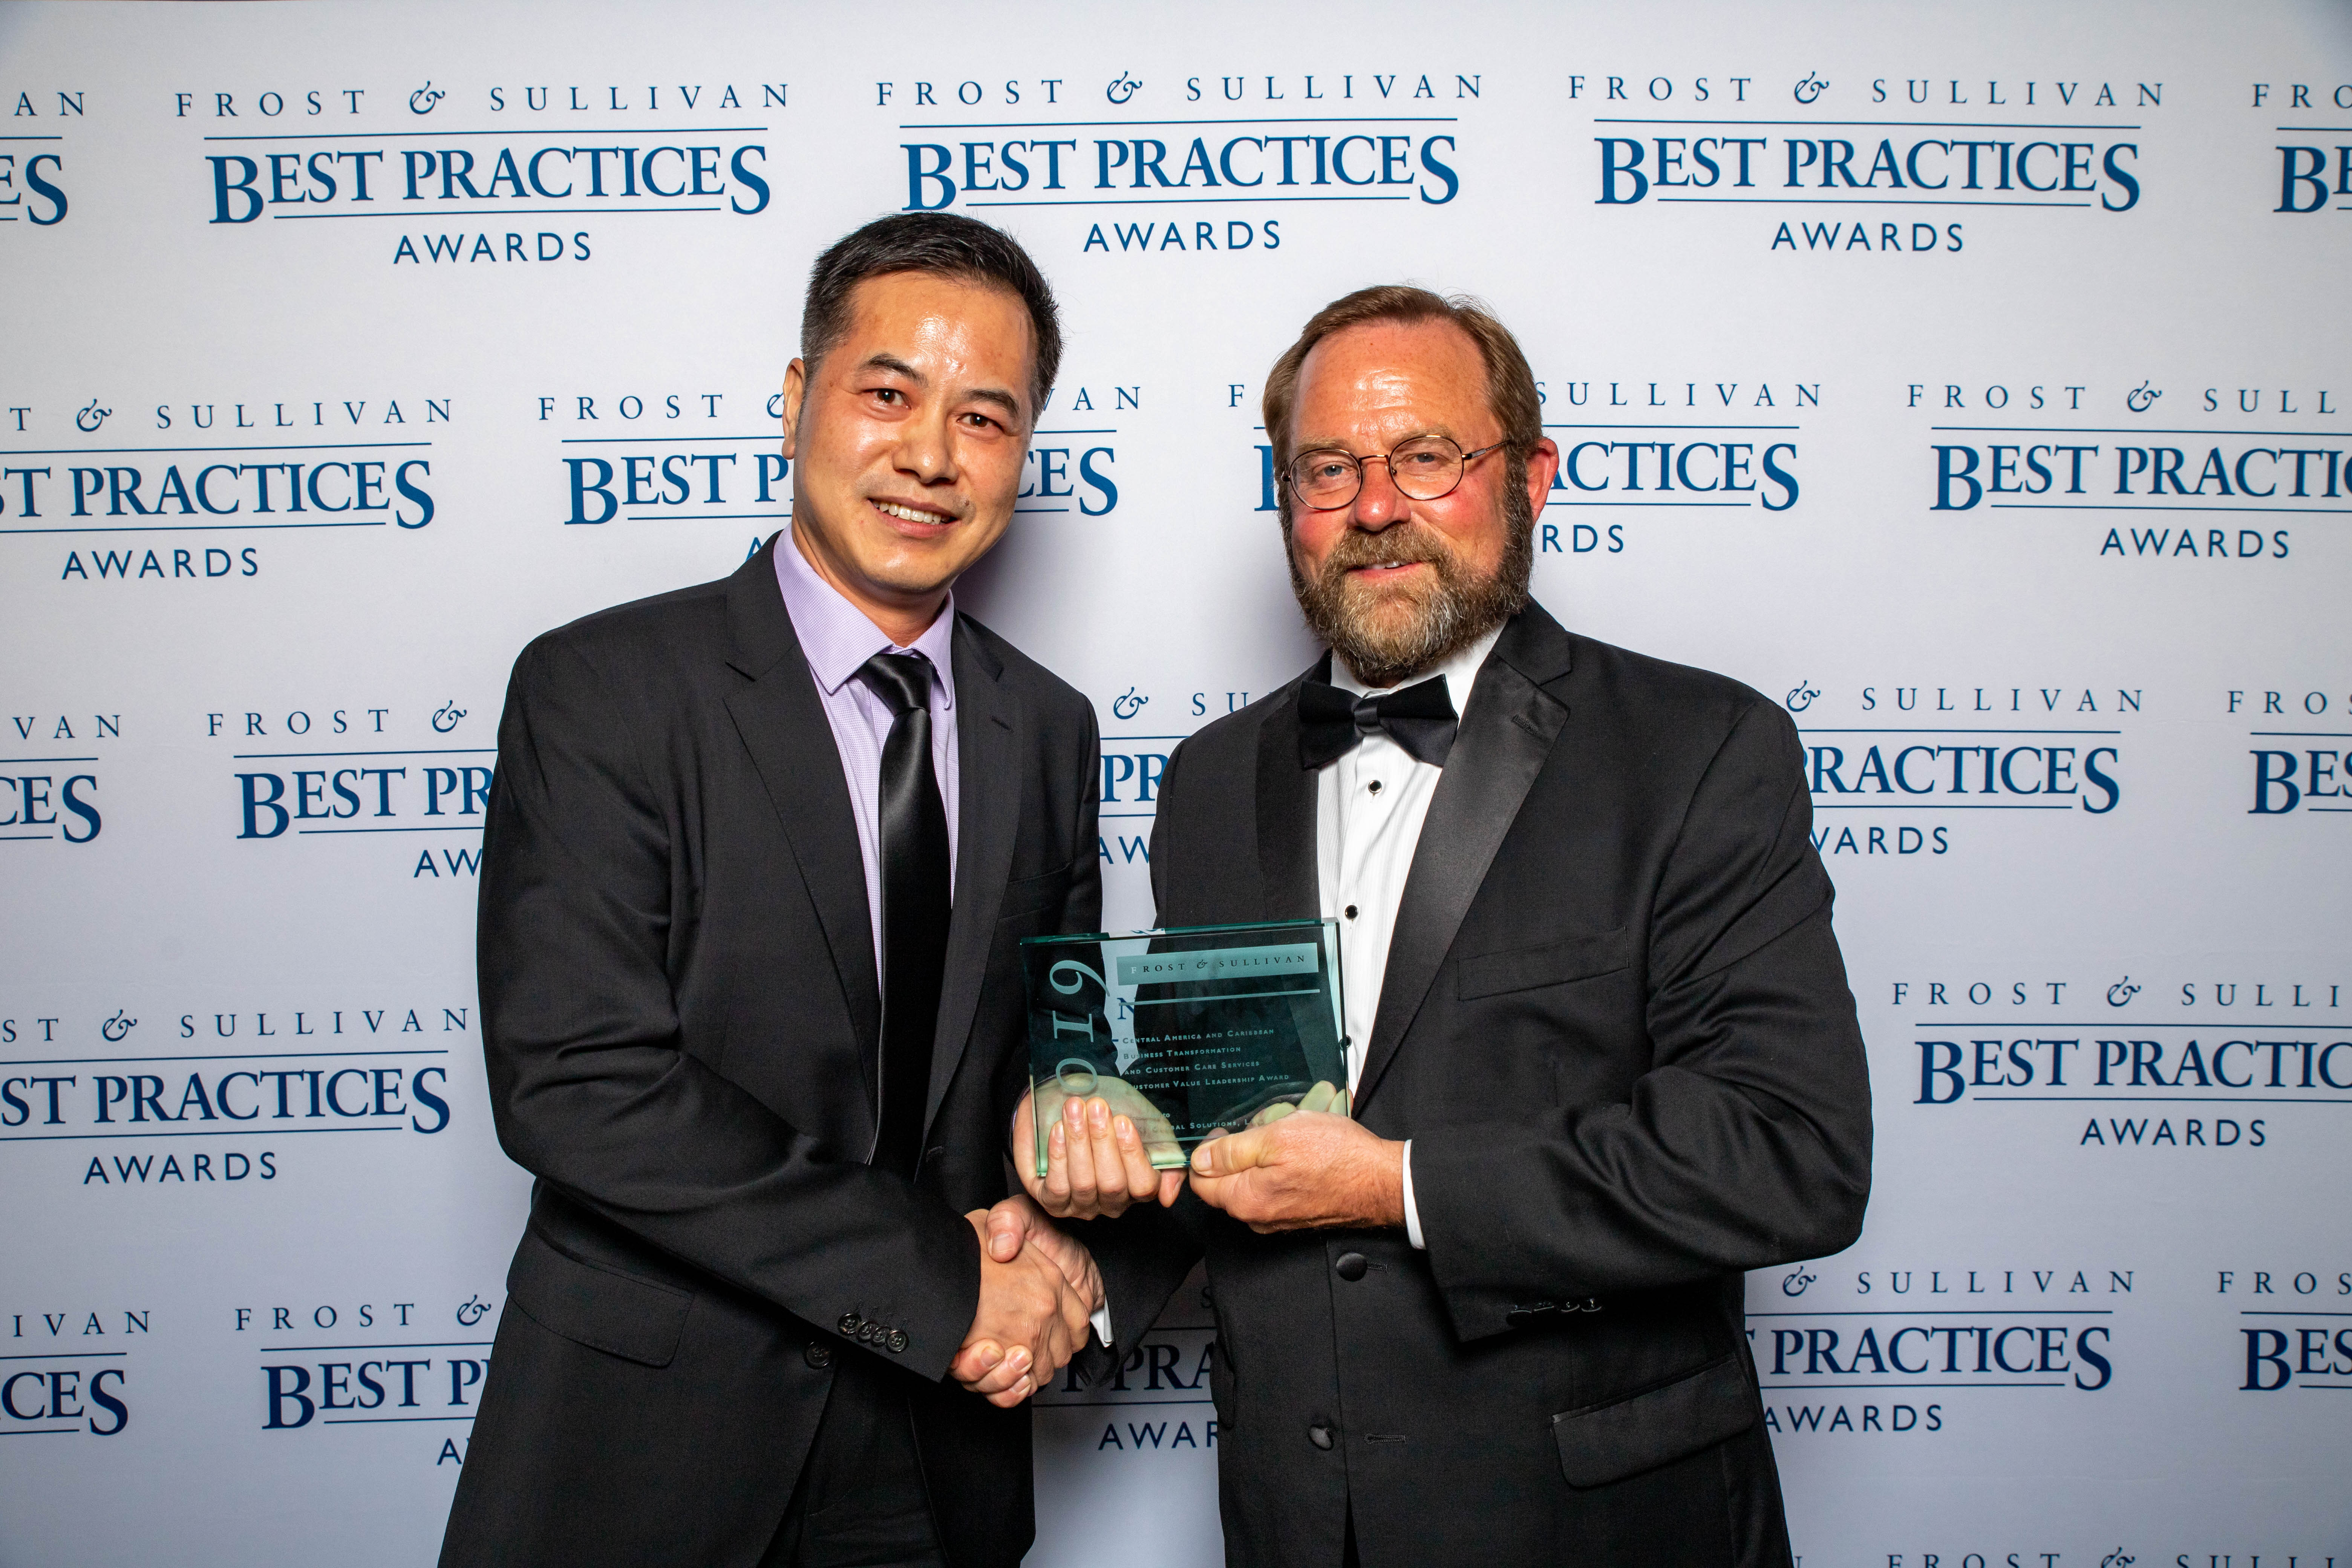 Photo showing a Frost & Sullivan representative and VXI's CEO David Zhou holding the 'Customer Value Leadership Award' at the 2019 Frost & Sullivan Best Practices Awards ceremony.